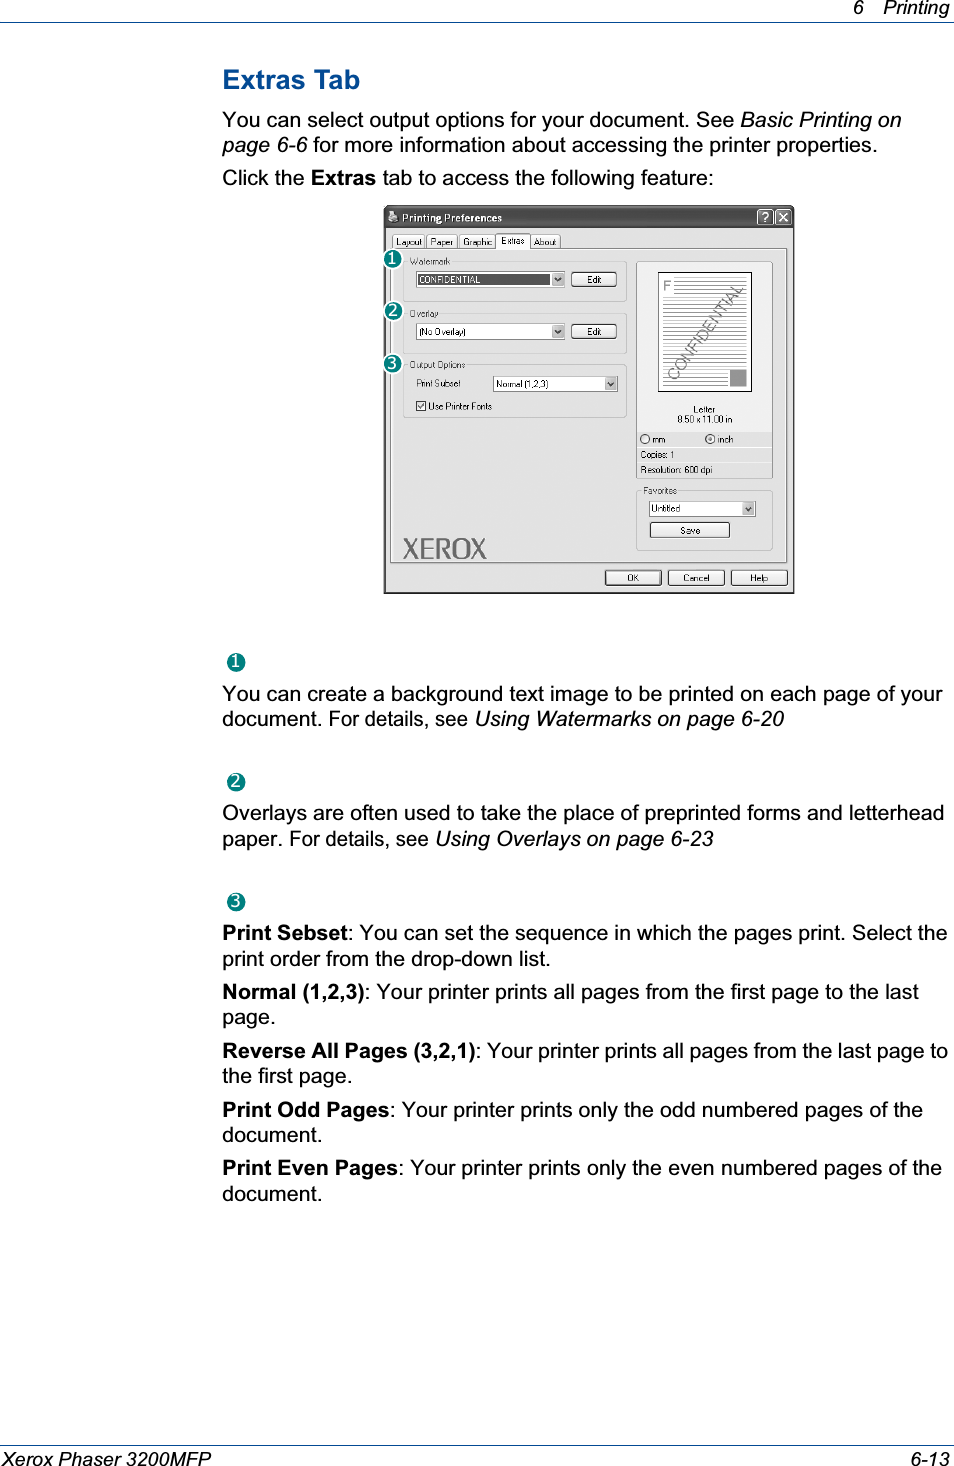 6Printing Xerox Phaser 3200MFP 6-13Extras TabYou can select output options for your document. See Basic Printing on page 6-6 for more information about accessing the printer properties.Click the Extras tab to access the following feature:  WatermarkYou can create a background text image to be printed on each page of your document. For details, seeUsing Watermarks on page 6-20OverlayOverlays are often used to take the place of preprinted forms and letterhead paper. For details, seeUsing Overlays on page 6-23Output OptionsPrint Sebset: You can set the sequence in which the pages print. Select the print order from the drop-down list.Normal (1,2,3): Your printer prints all pages from the first page to the last page.Reverse All Pages (3,2,1): Your printer prints all pages from the last page to the first page.Print Odd Pages: Your printer prints only the odd numbered pages of the document.Print Even Pages: Your printer prints only the even numbered pages of the document.123123